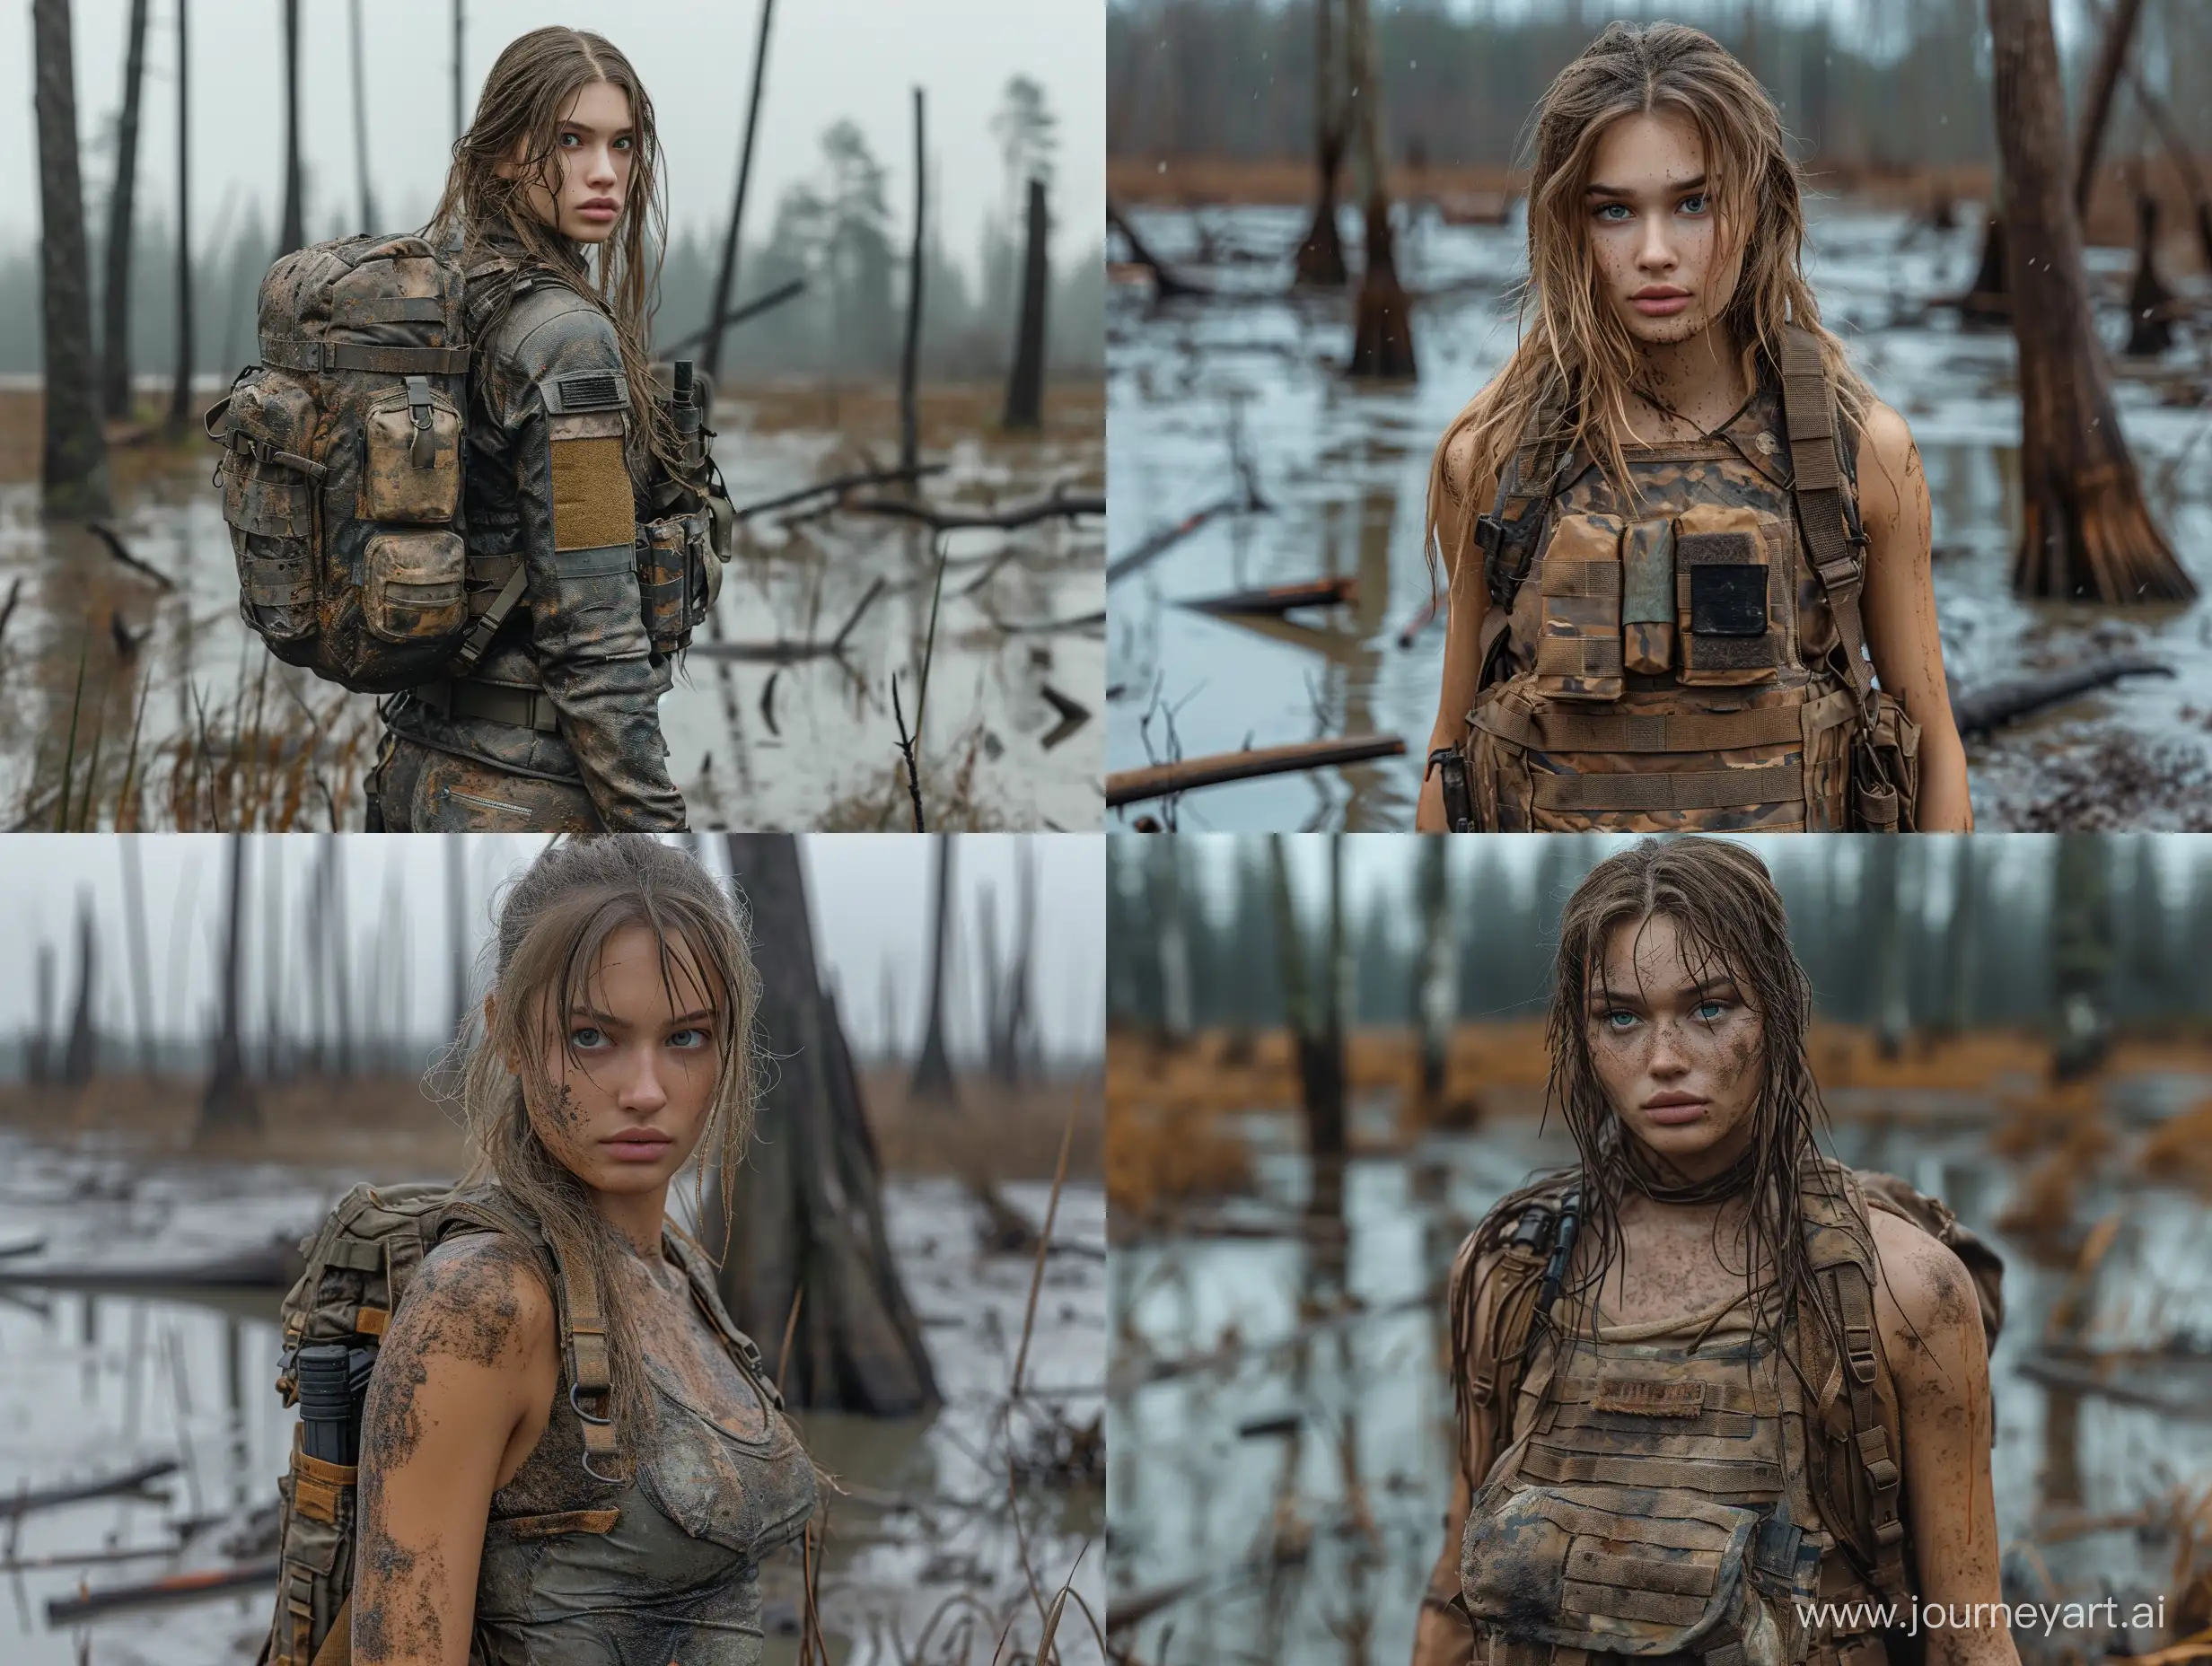 realistic beautiful вфкл dirty skin female bandit in S.T.A.L.K.E.R  in darkcamo plate carrier tactical equipment dark swamp dead trees --s 999 --style raw --v 6